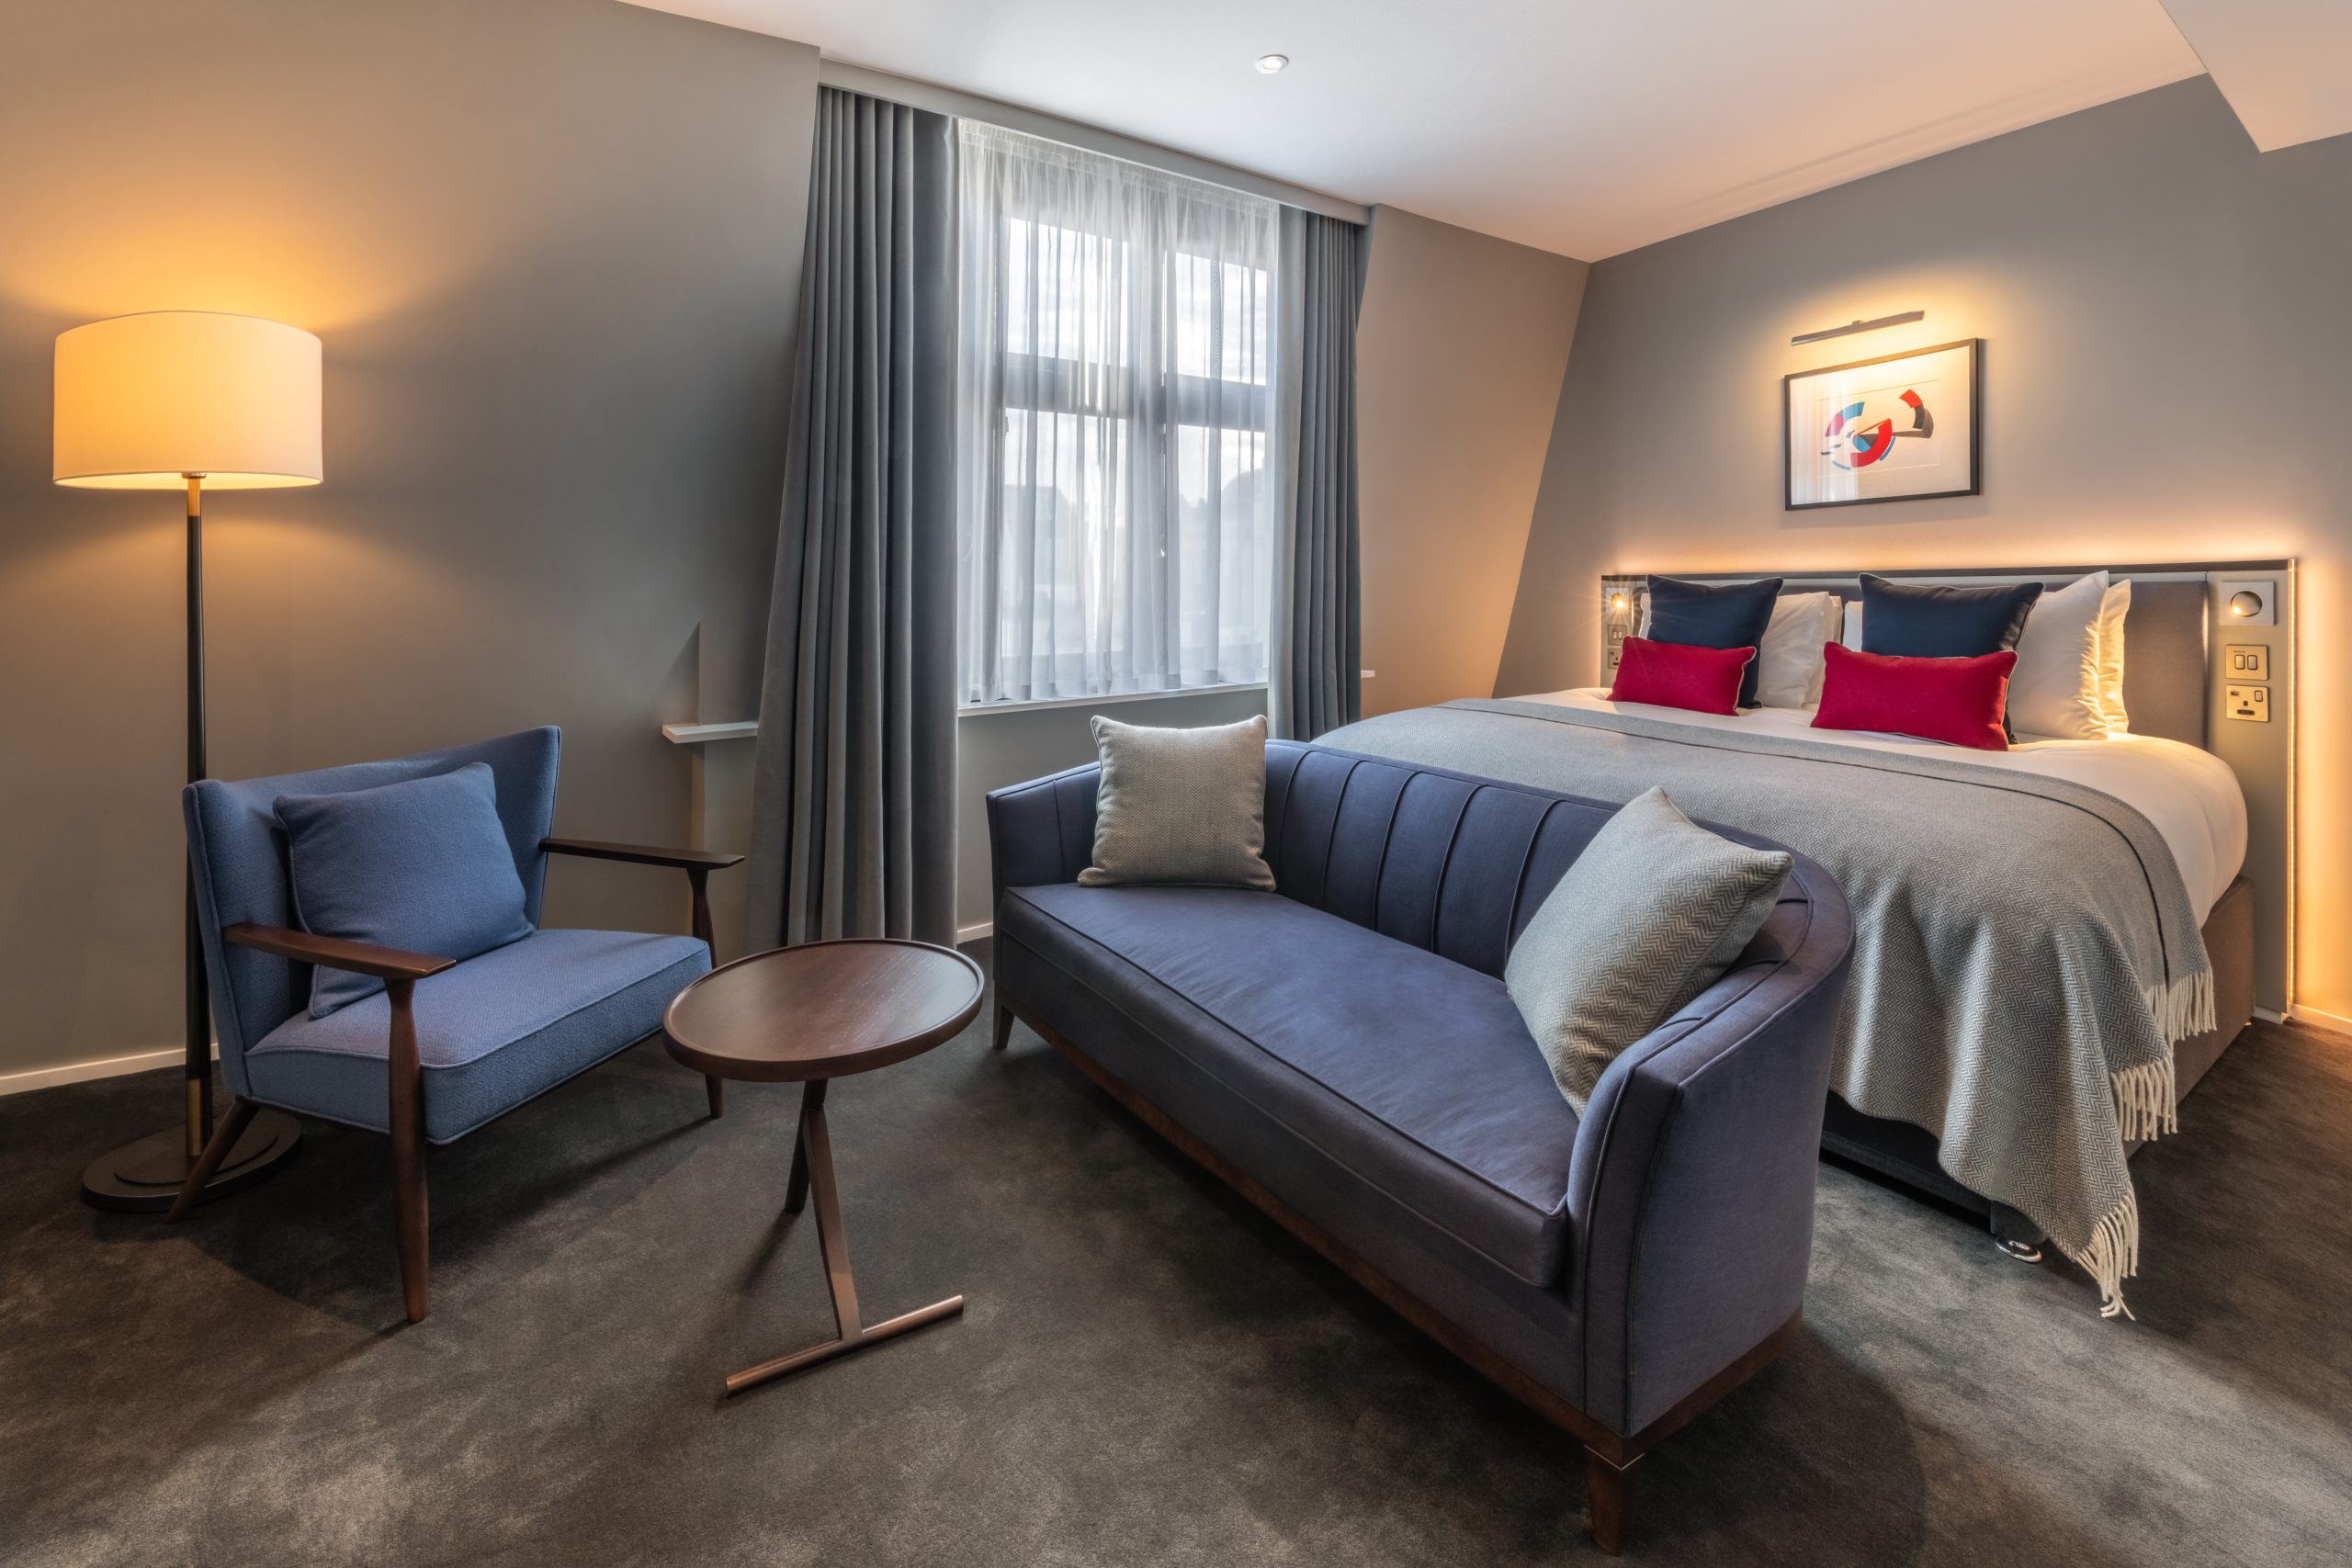 A junior suite with a double bed, a small dining area and a sofa, located in Covent Garden.